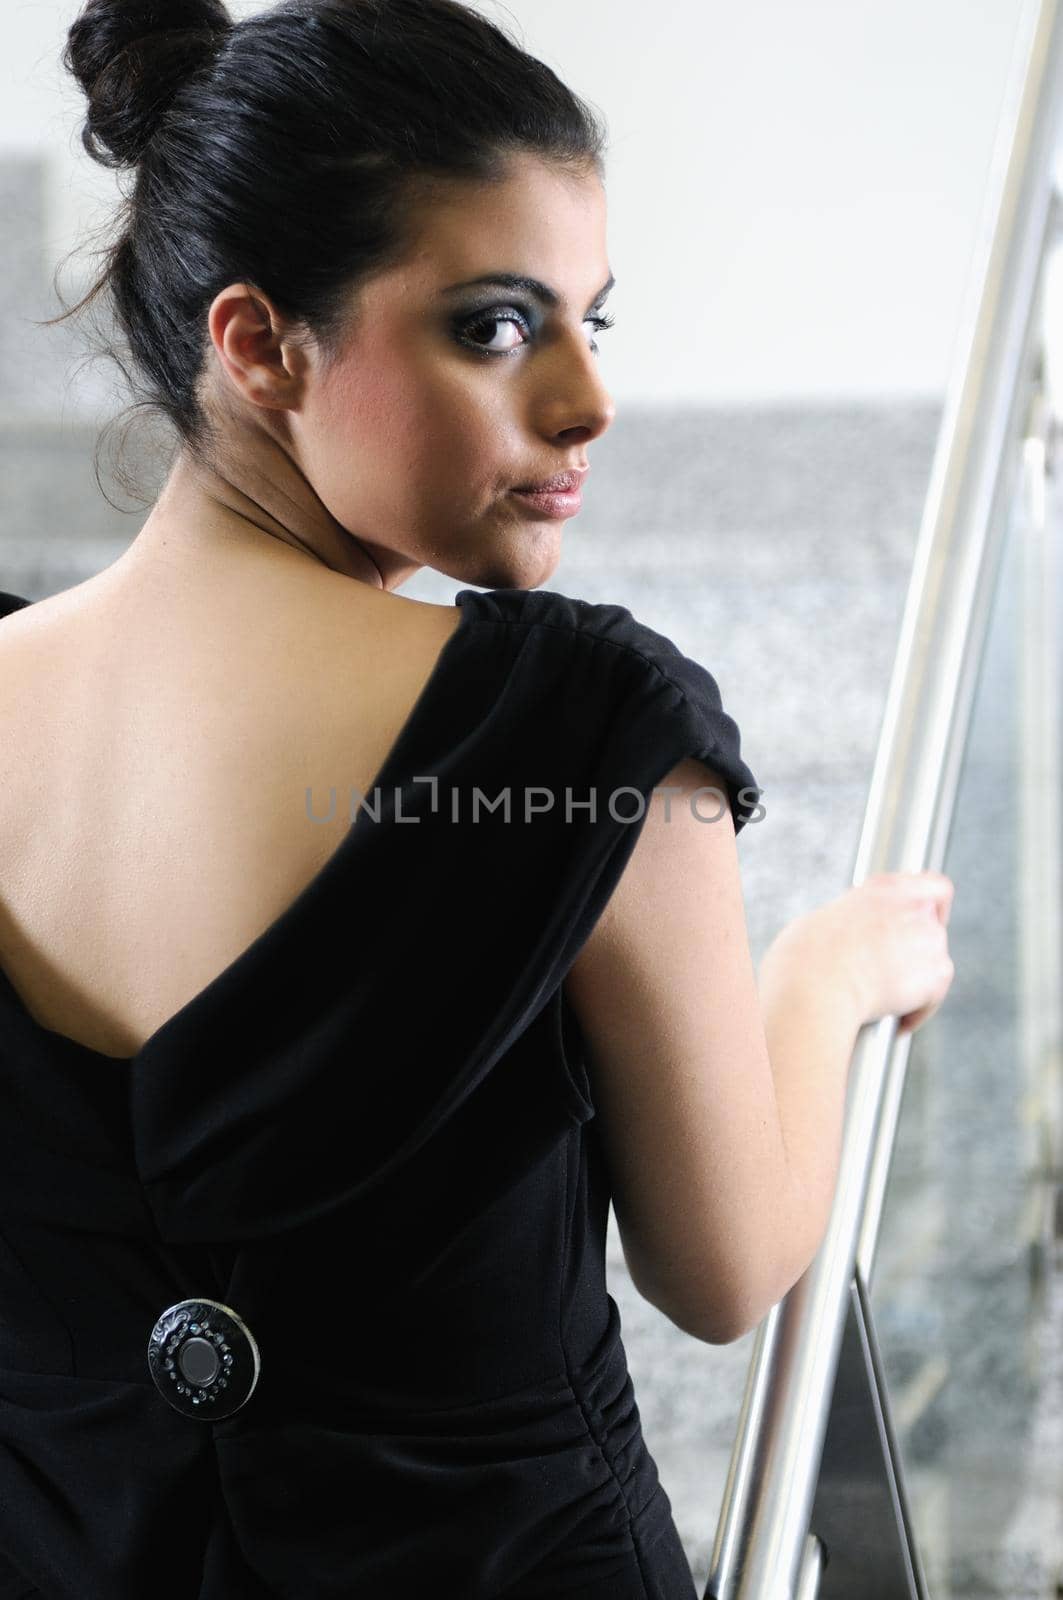 beautiful young lady in black dress shoot from back